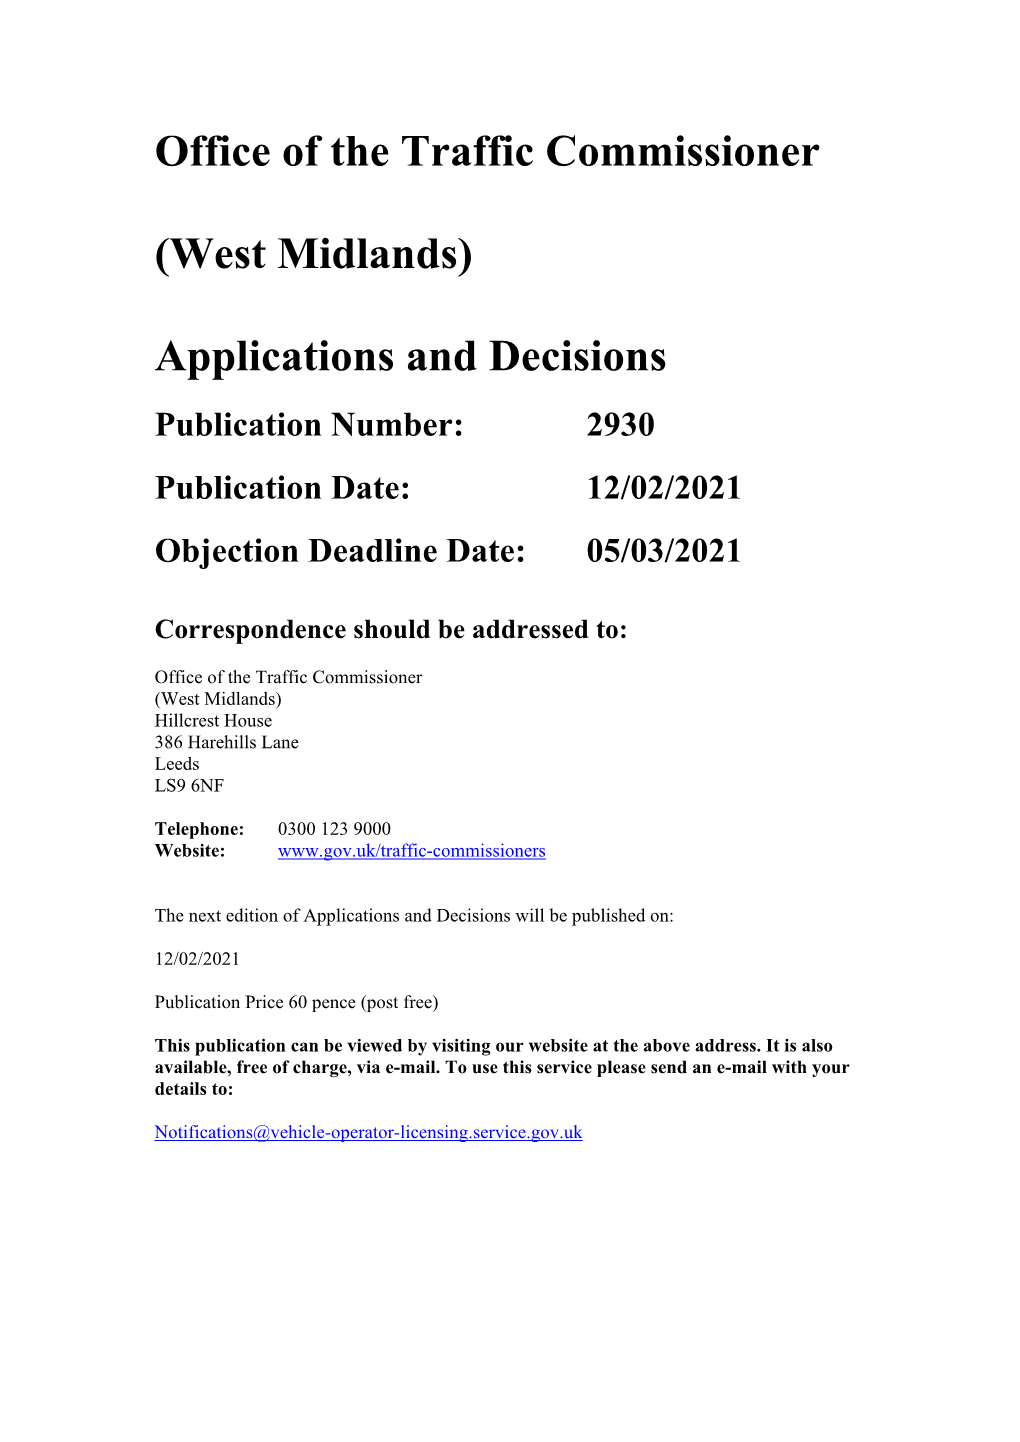 Applications and Decisions for the West Midlands 2930